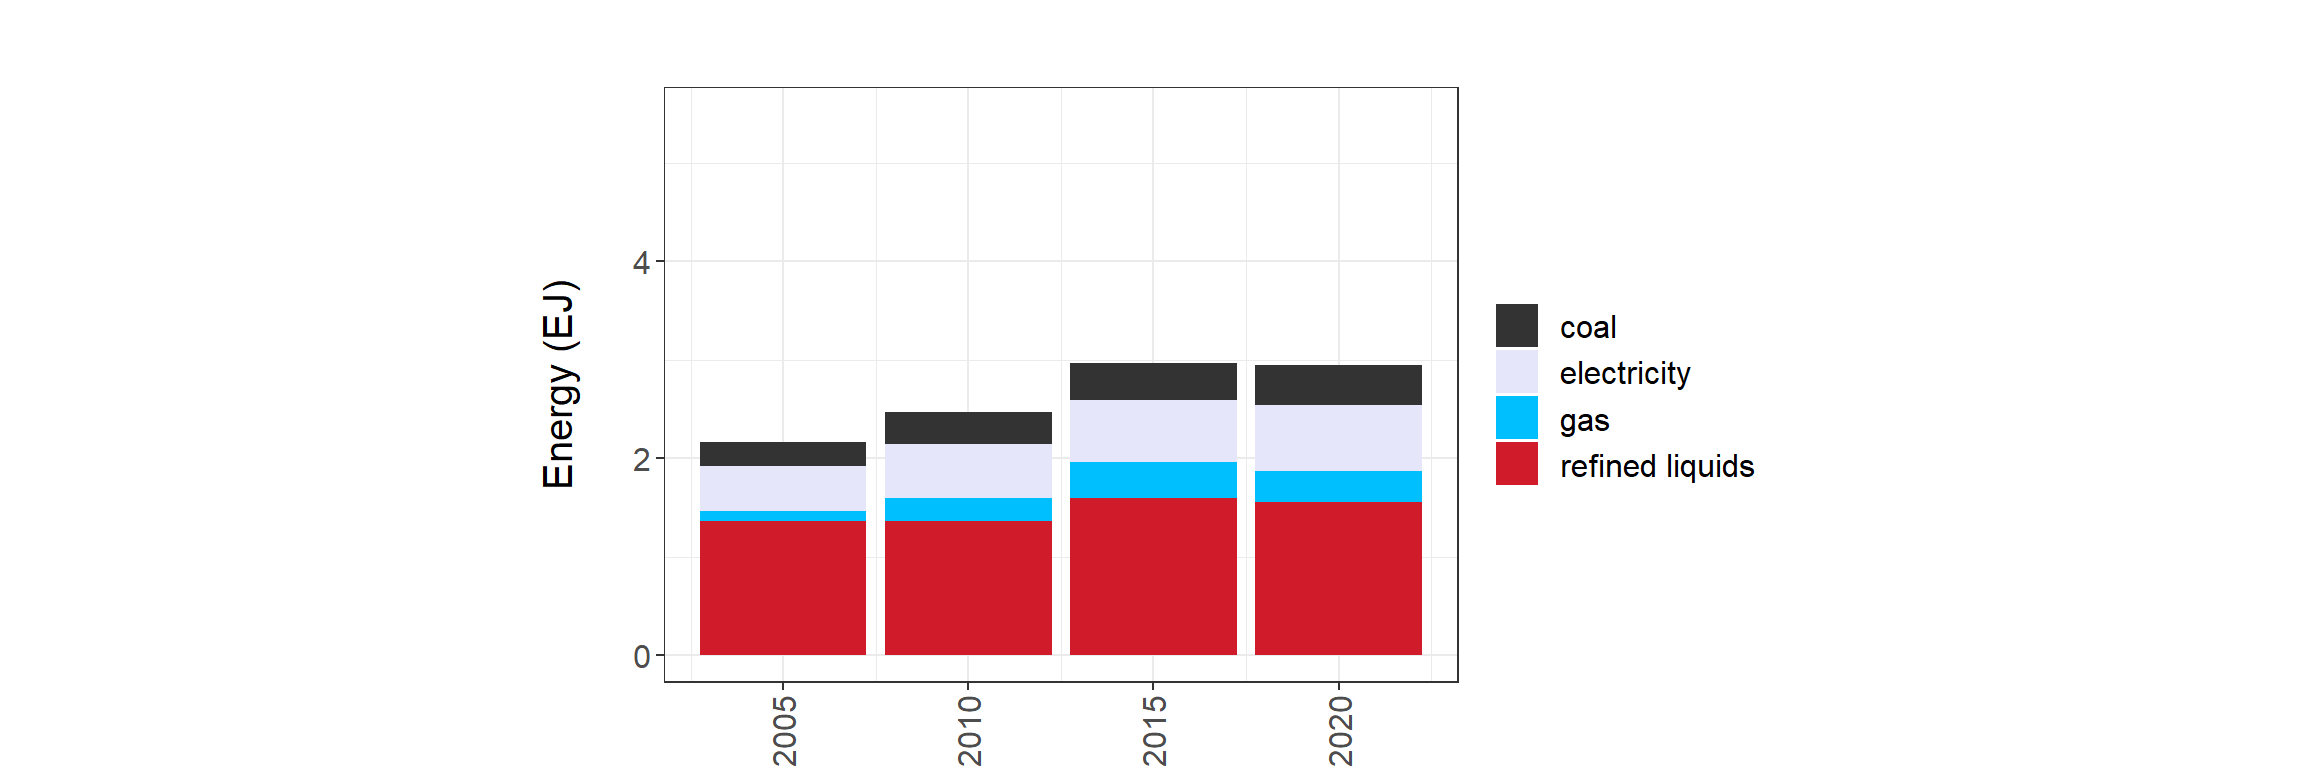 **National total final energy by fuel from local data (left), GCAM output (middle), and GCAM output without industrial feedstocks (right) from 2005 to 2020. Local data source: [Energy Policy and Planning Office](http://www.eppo.go.th/index.php/en/en-energystatistics/summary-statistic?orders[publishUp]=publishUp&issearch=1)**